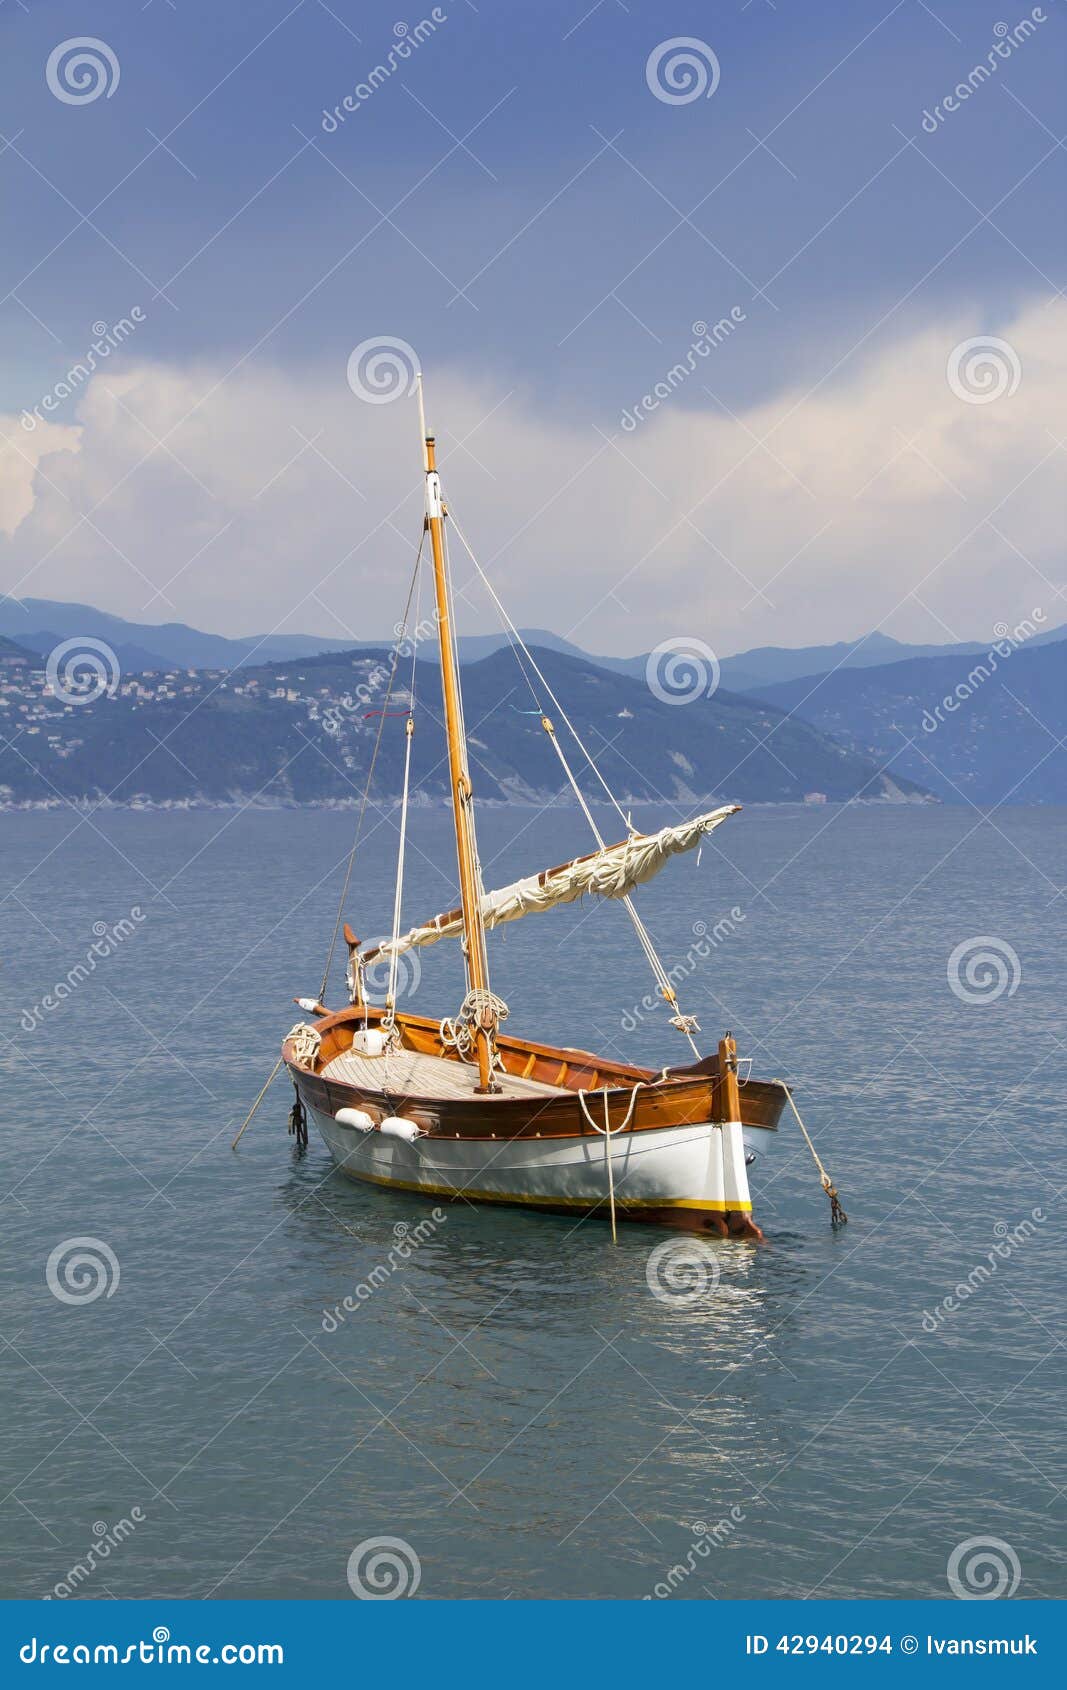 Small wooden sail ship stock photo. Image of deck, mast - 42940294